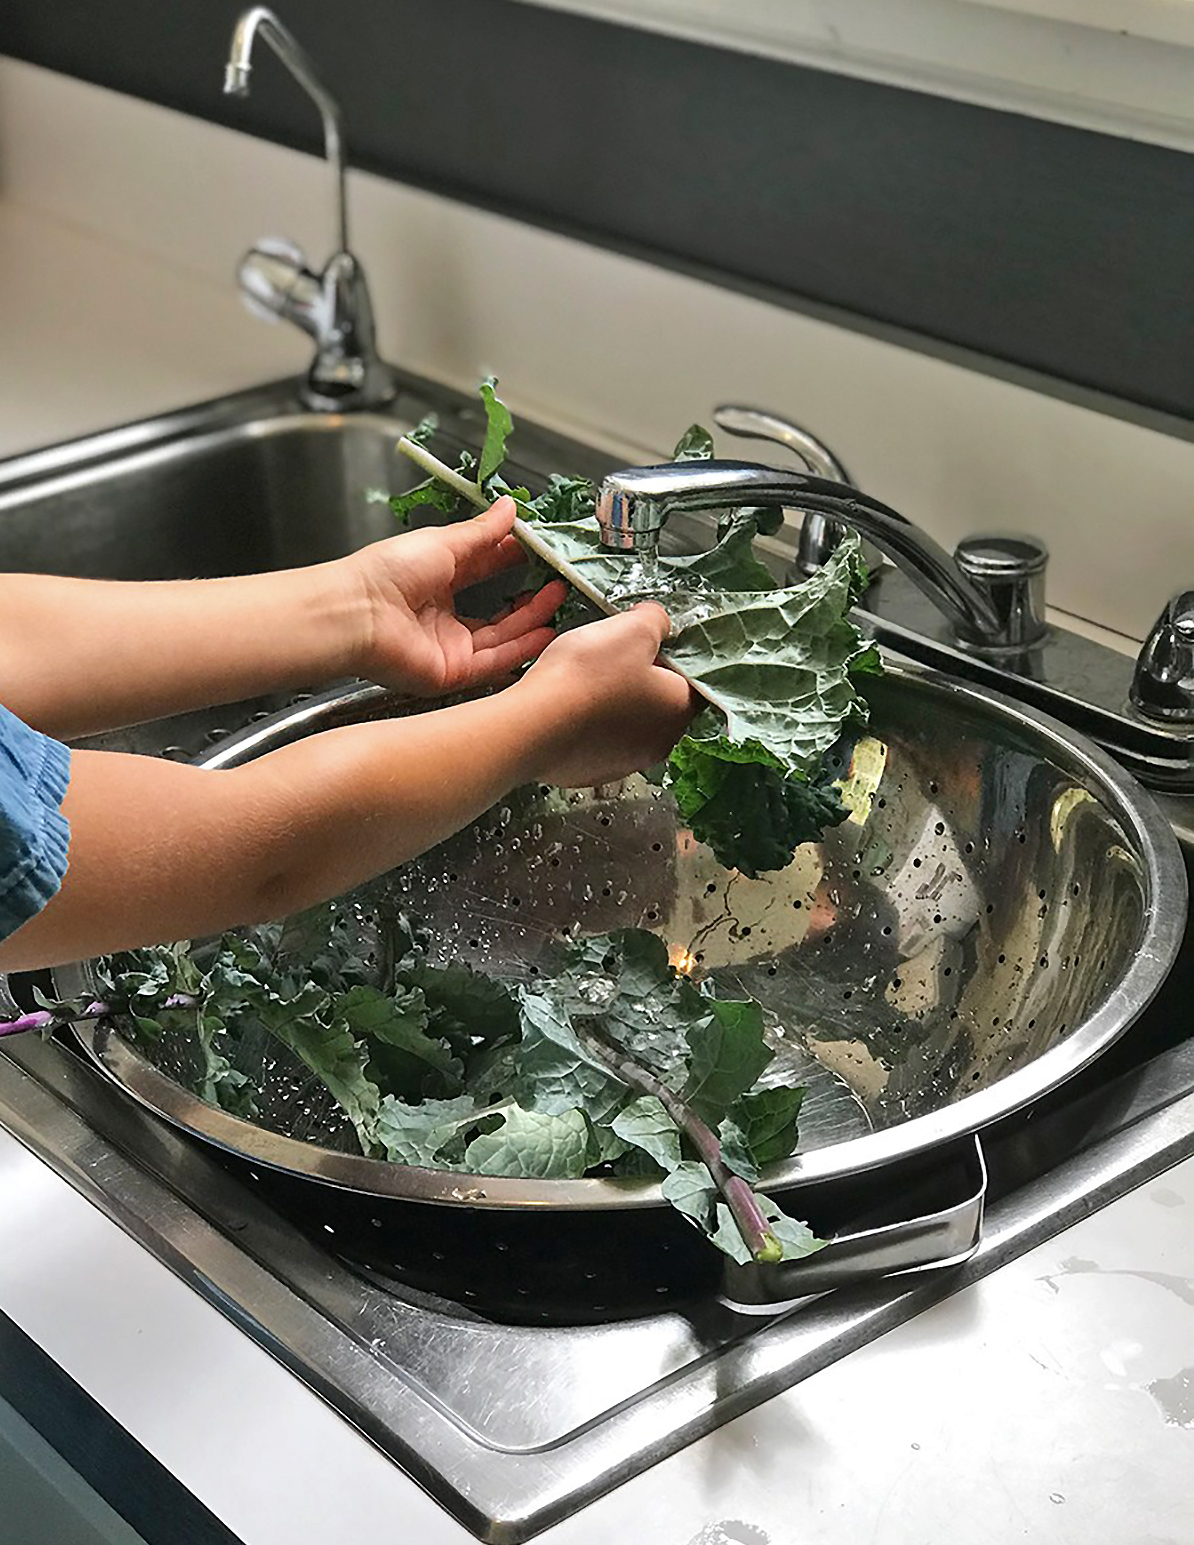 seven year old child rinsing and de-stemming kale over water and a silver colander in sink